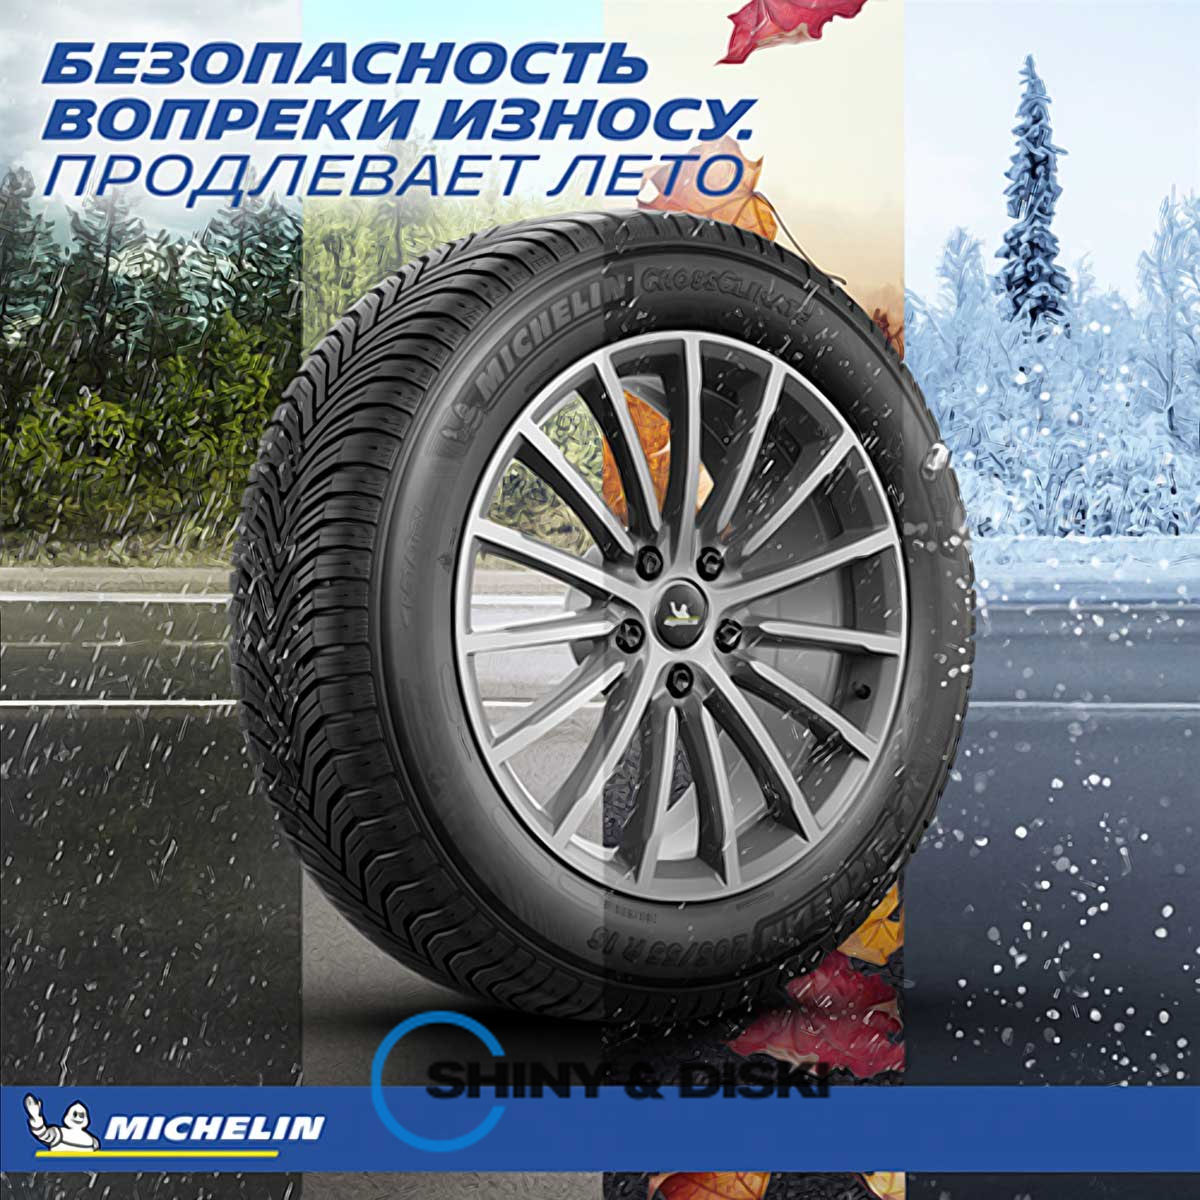 покрышки michelin cross climate+ 225/55 r16 99w xl